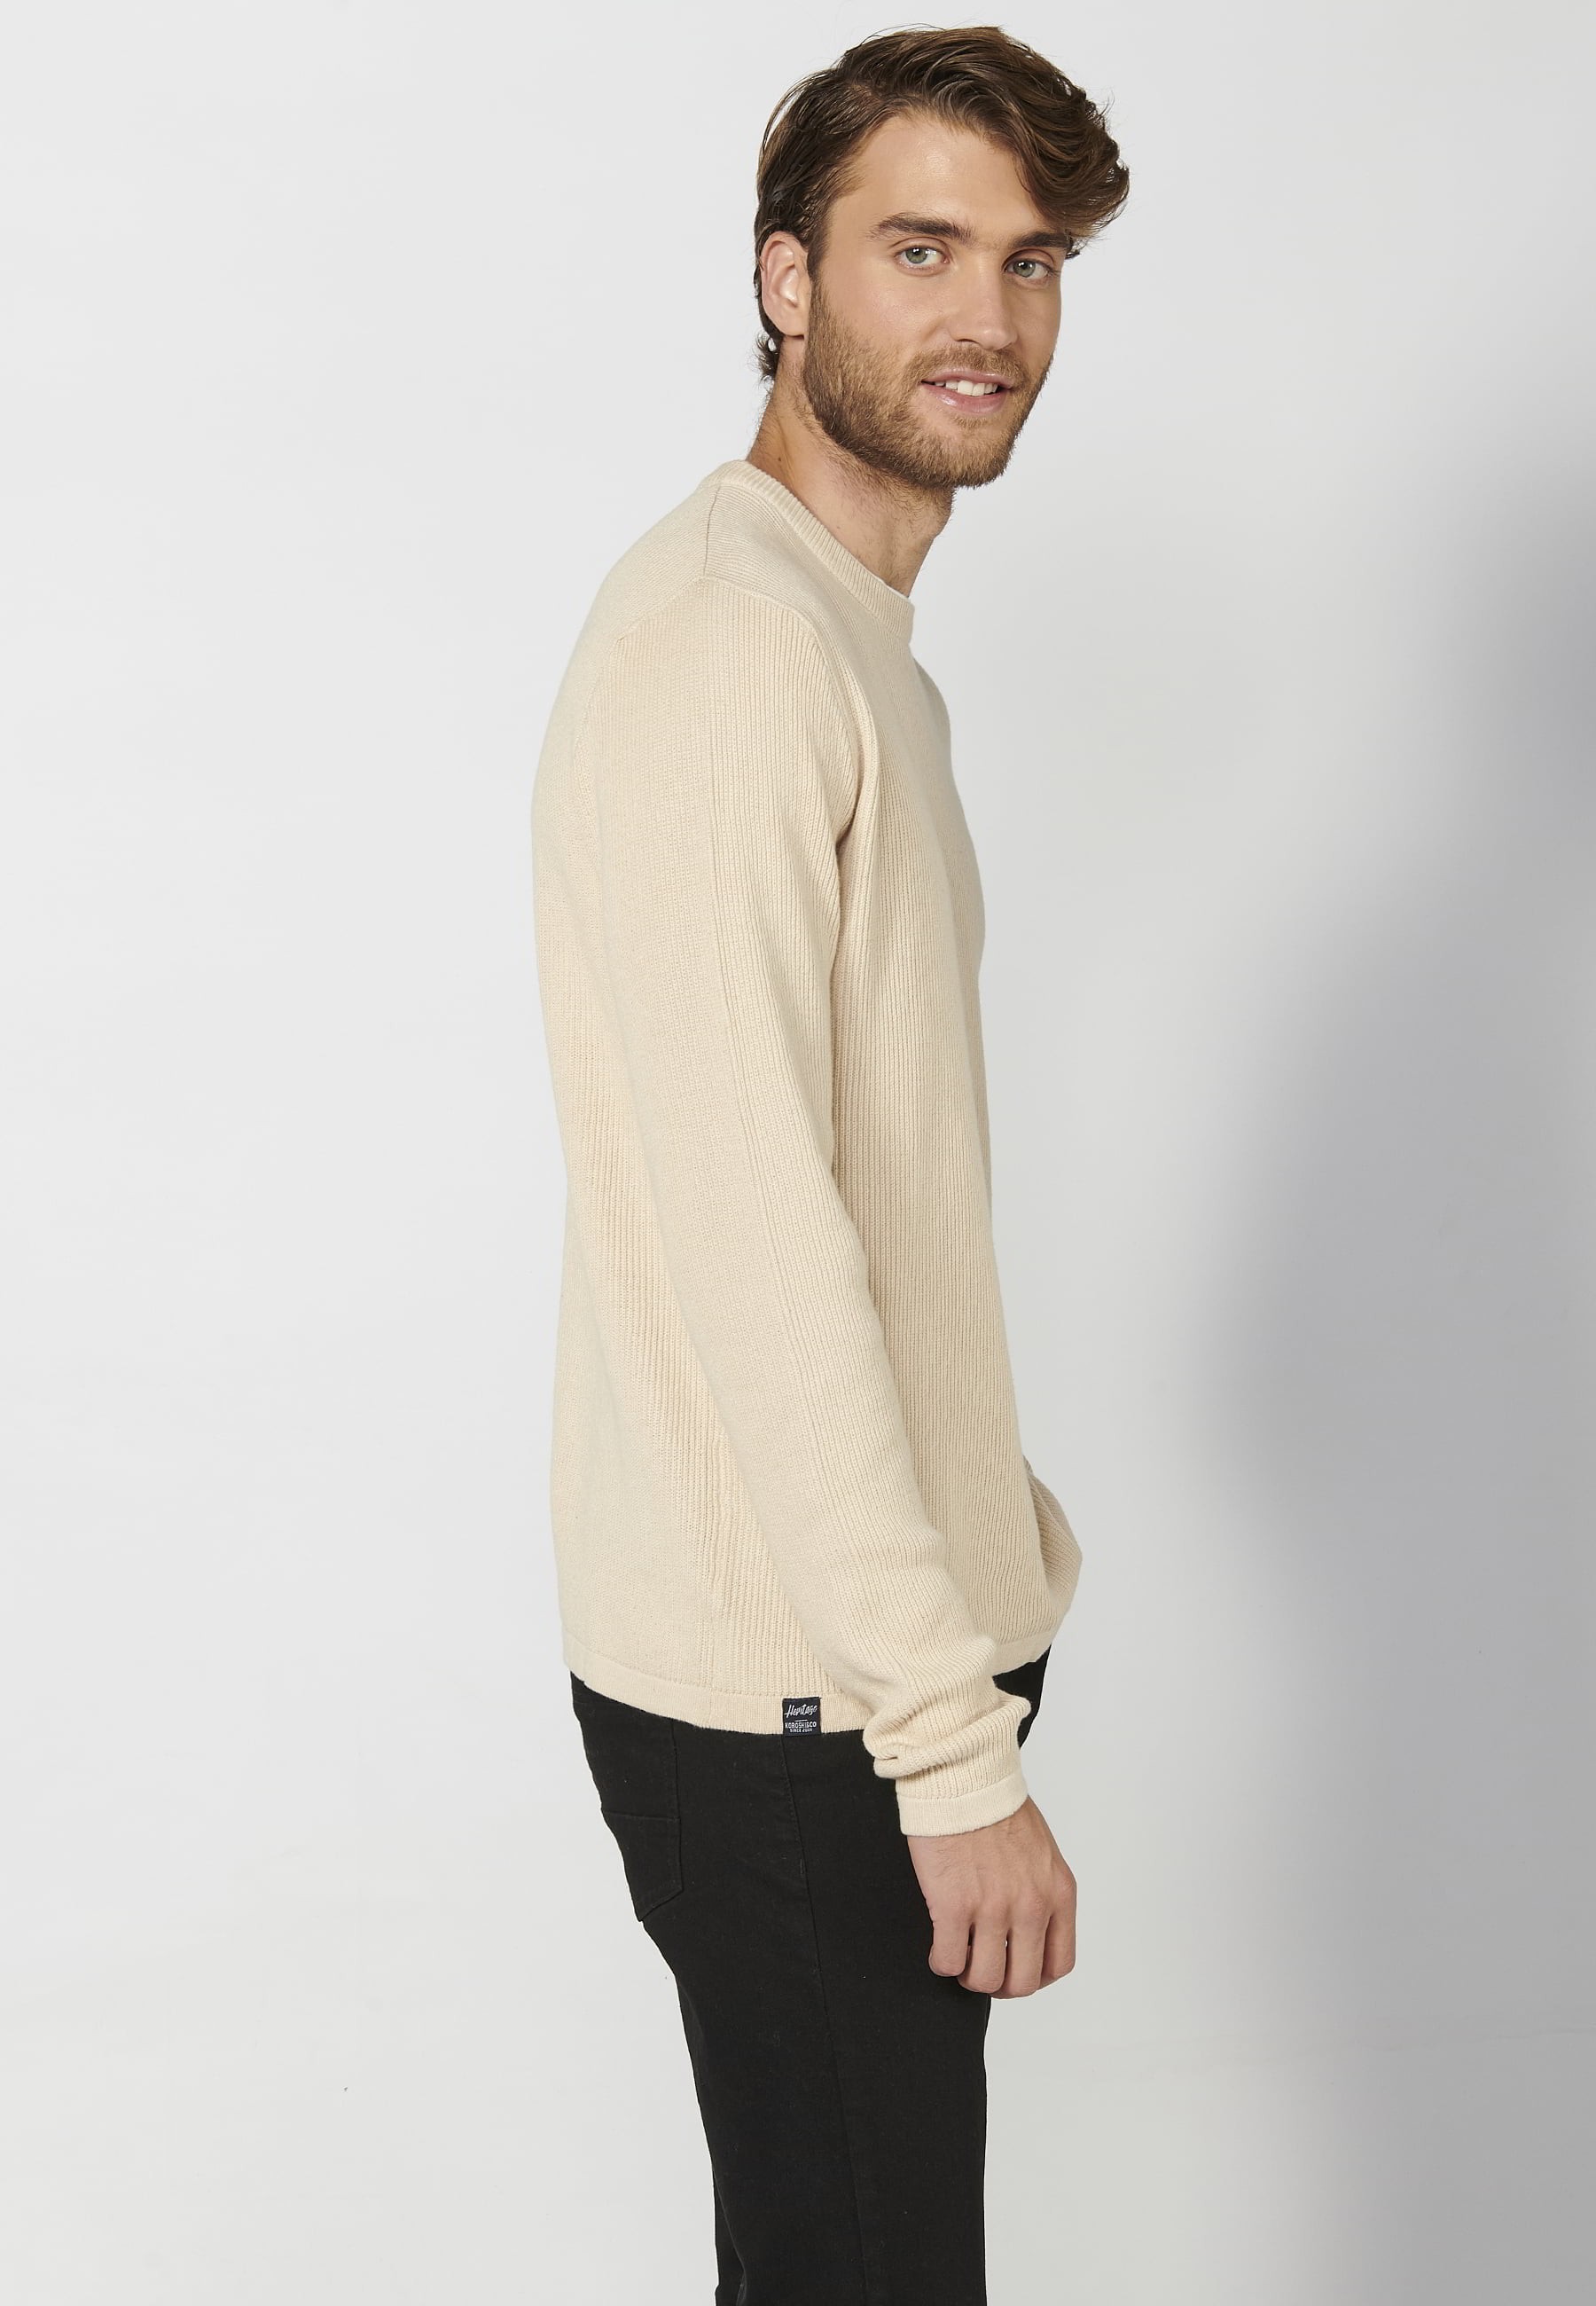 Long-sleeved cotton tricot sweater with embroidered detail in Cream color for Men 7